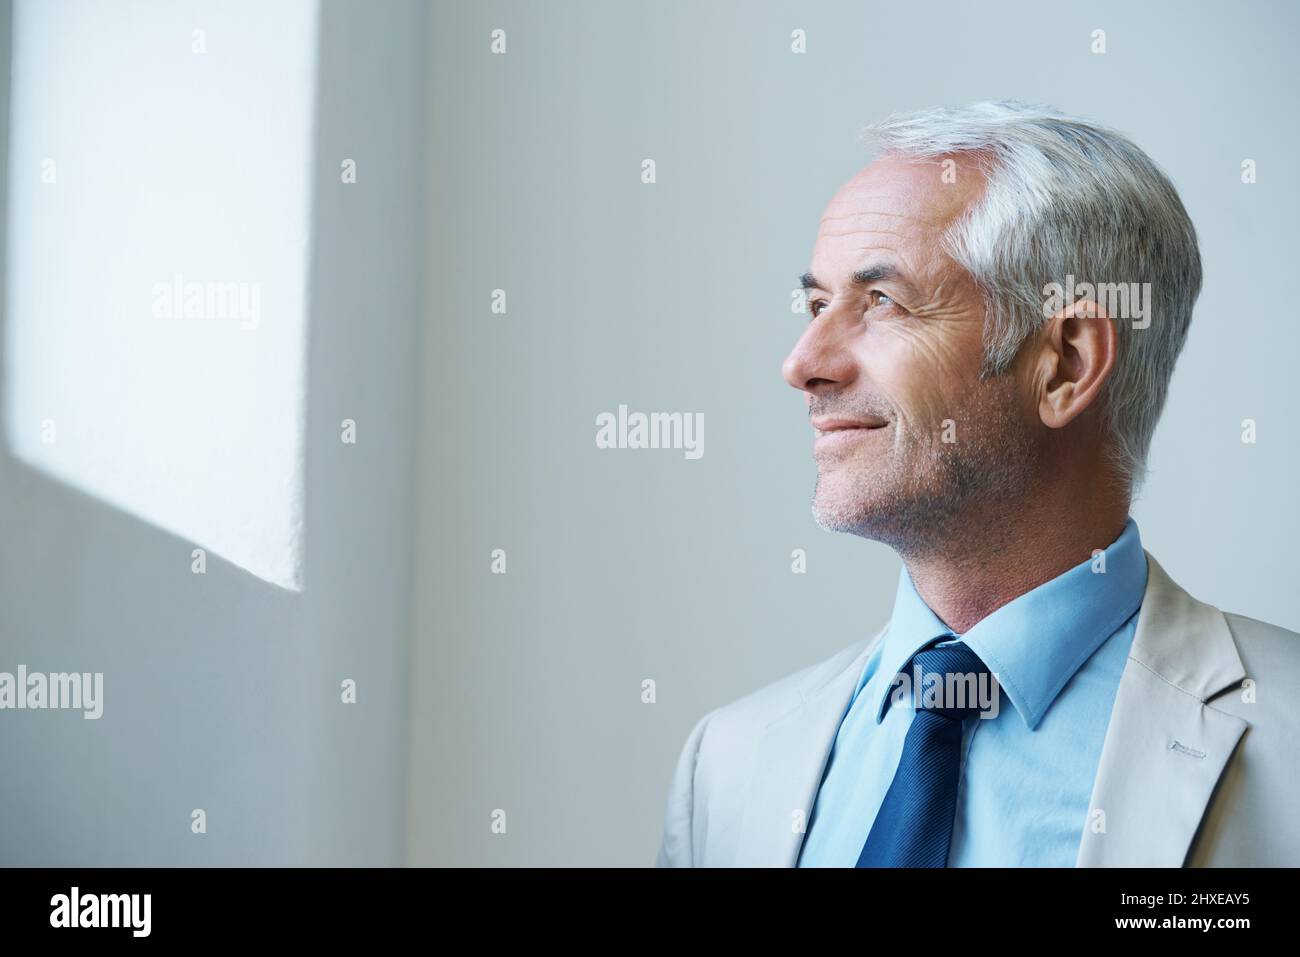 Time for business. Shot of a thoughtful-looking mature businessman looking out of a window. Stock Photo